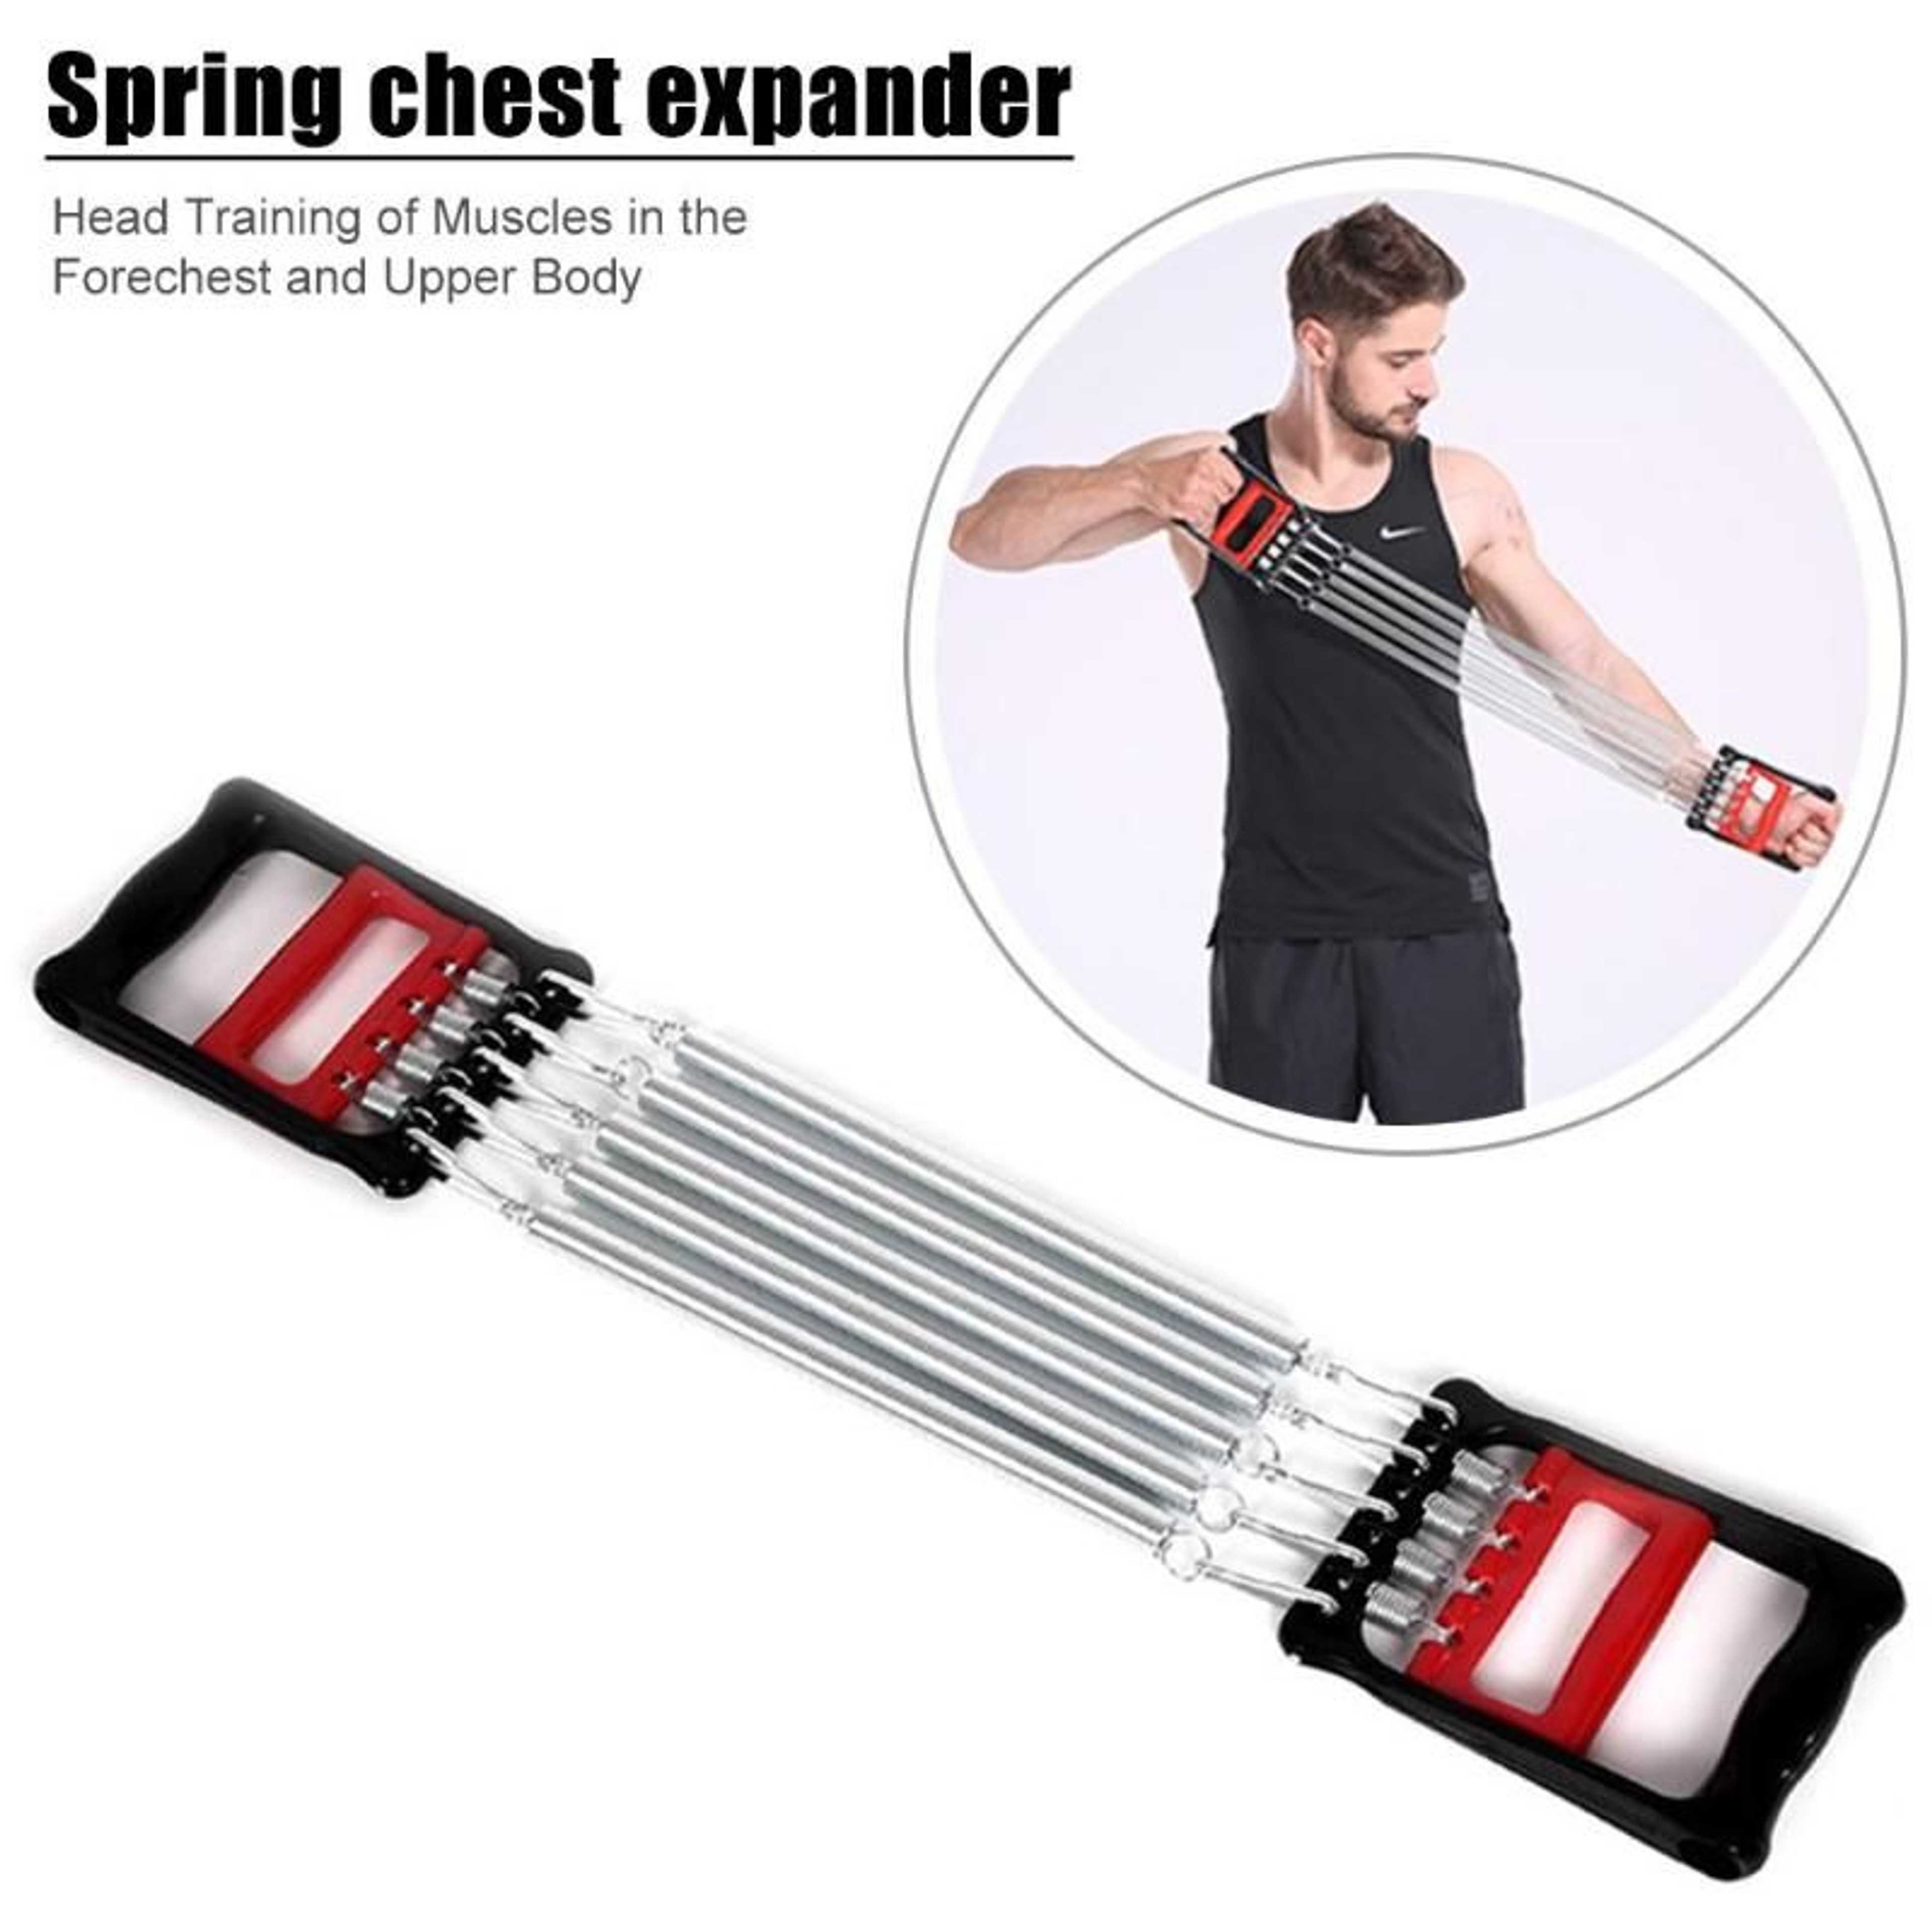 Fitness Wrist Forearm Adjustable Hand Grip Springs Chest Expander Strength Training Device